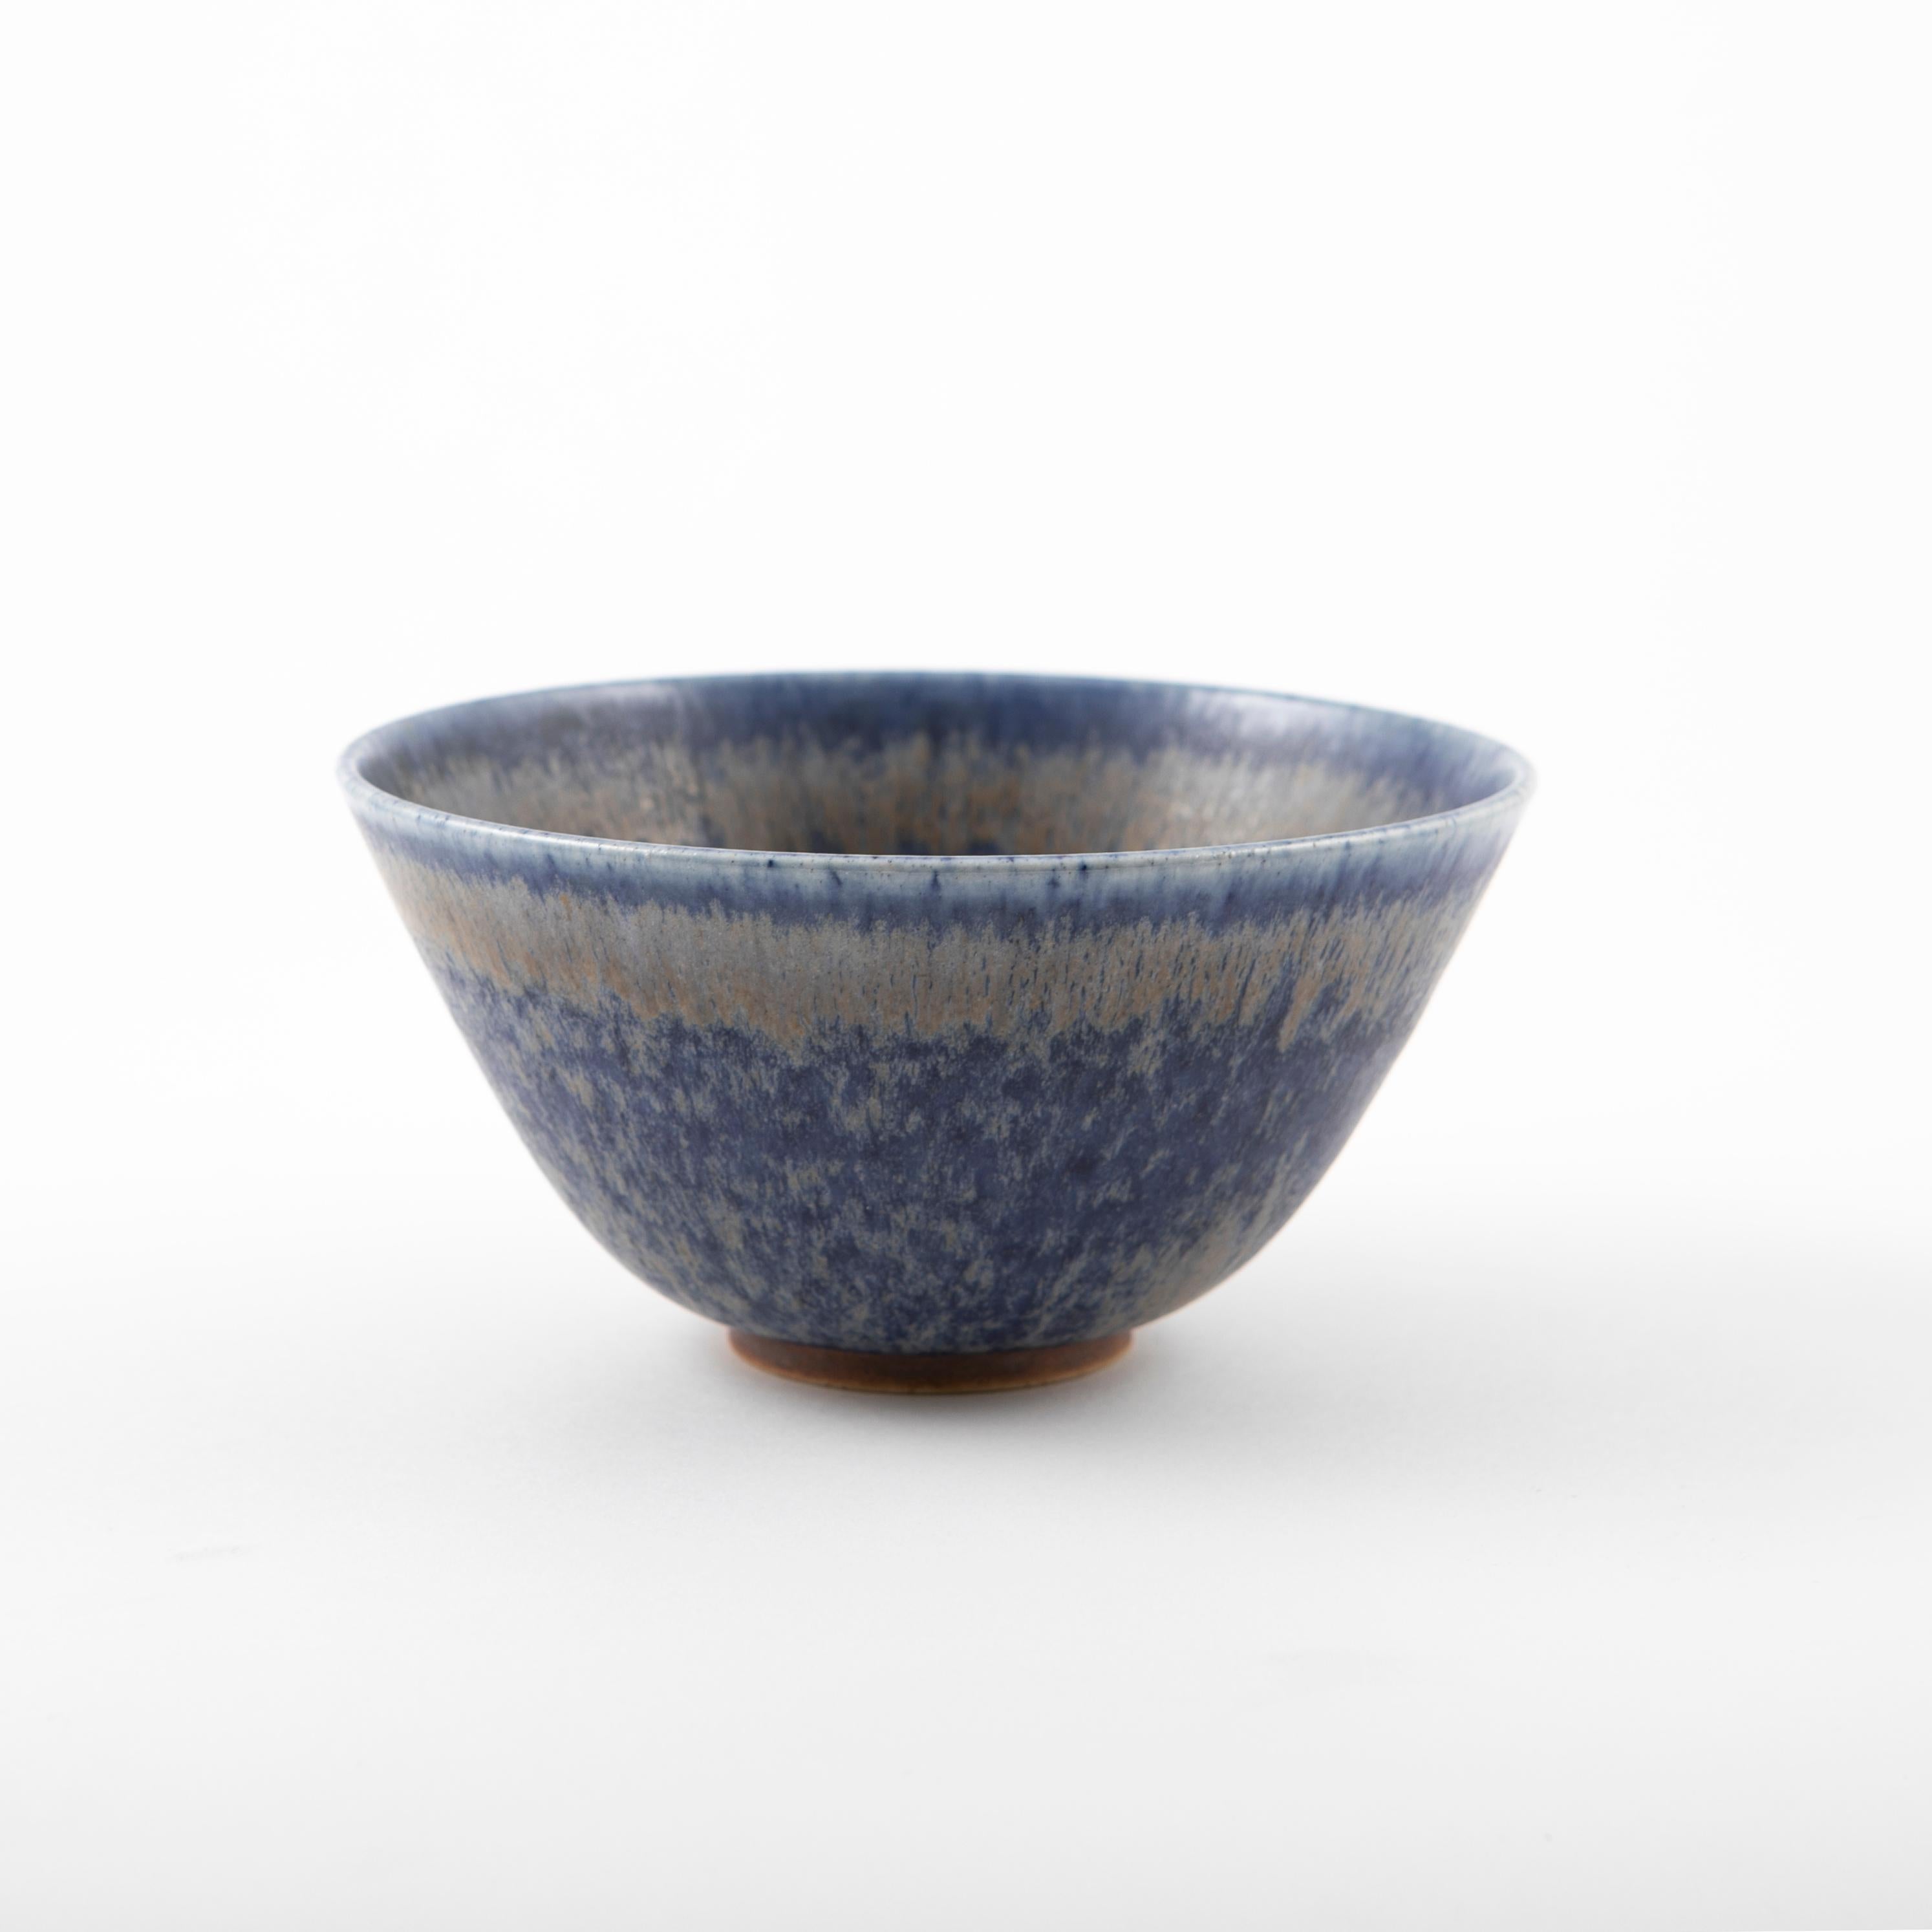 Saxbo Blue Glazed Stoneware Bowl In Good Condition For Sale In Kastrup, DK